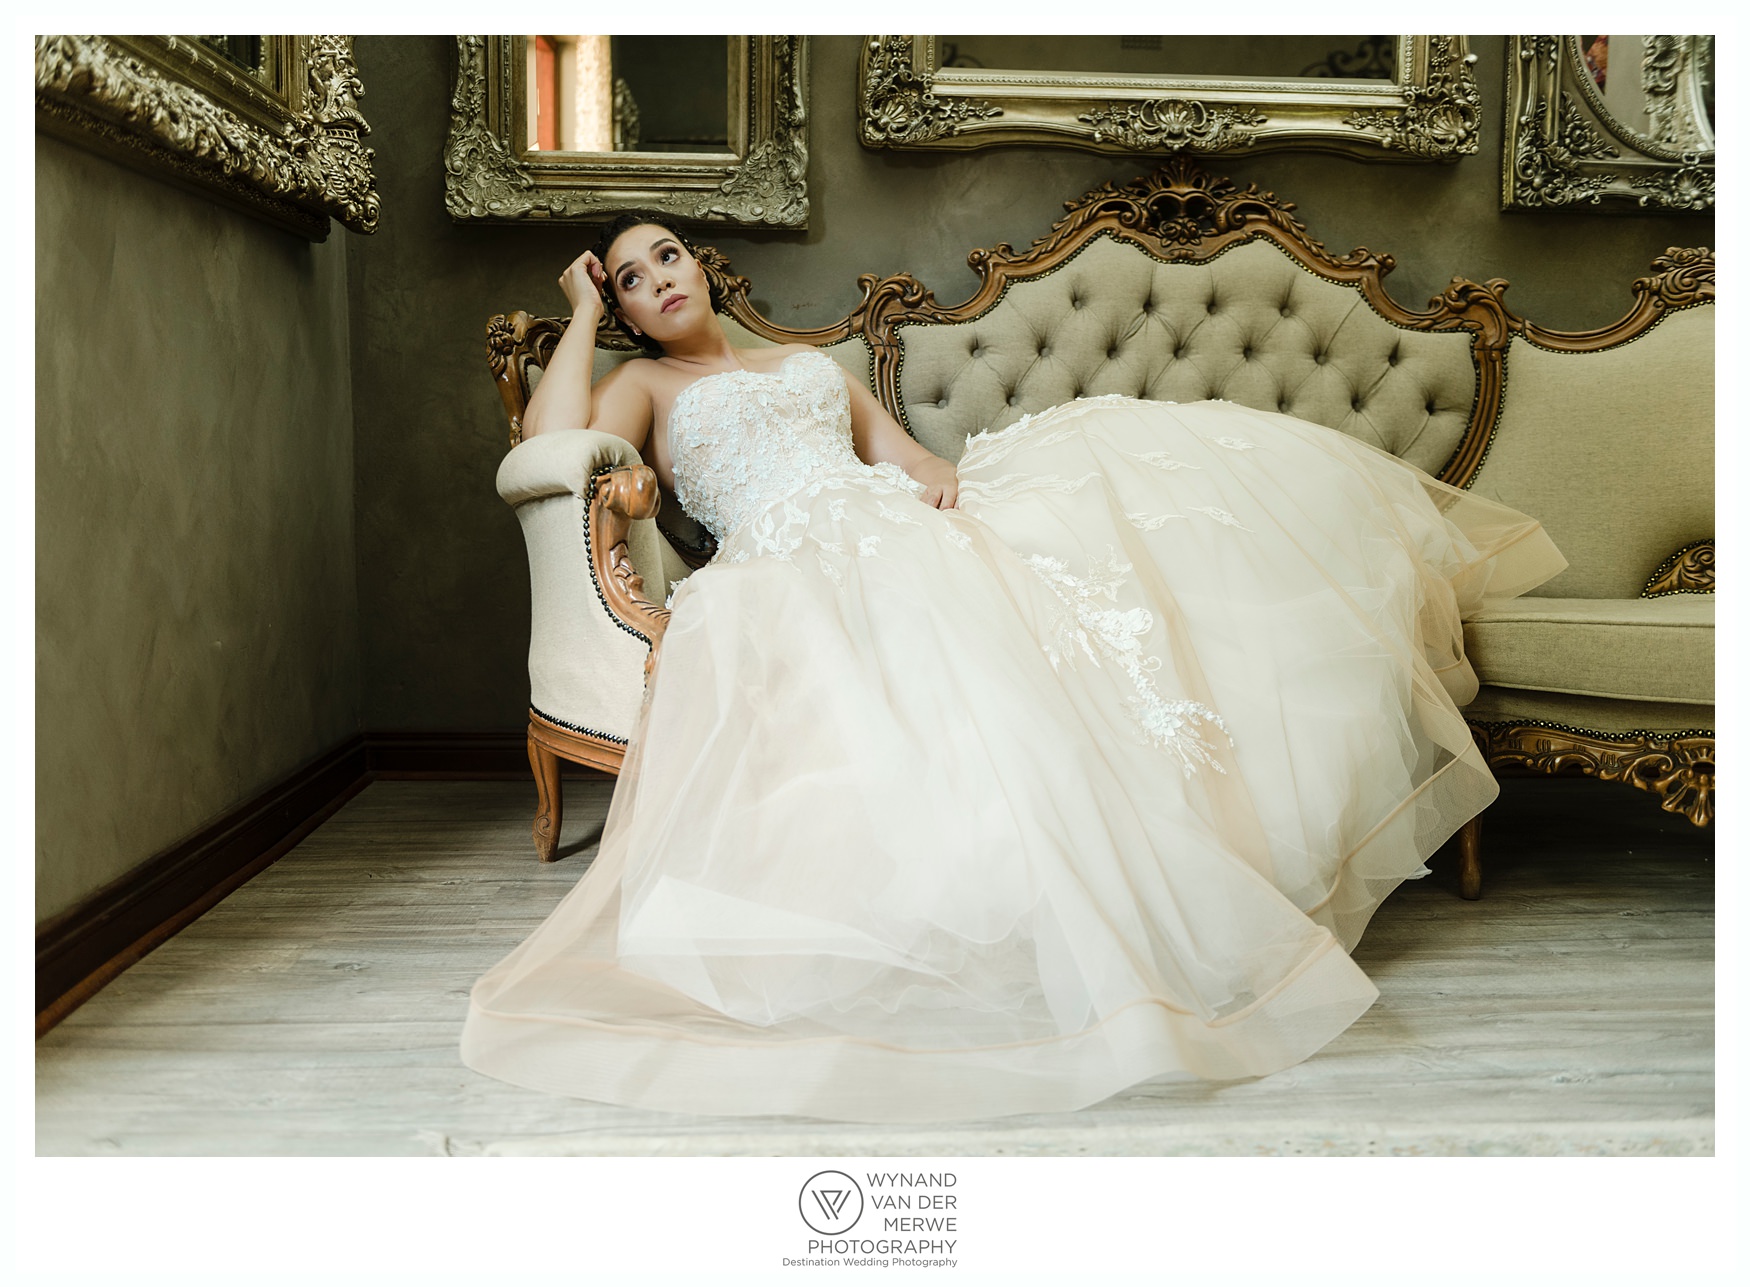 Yannick and Crystal's wedding at Memoire